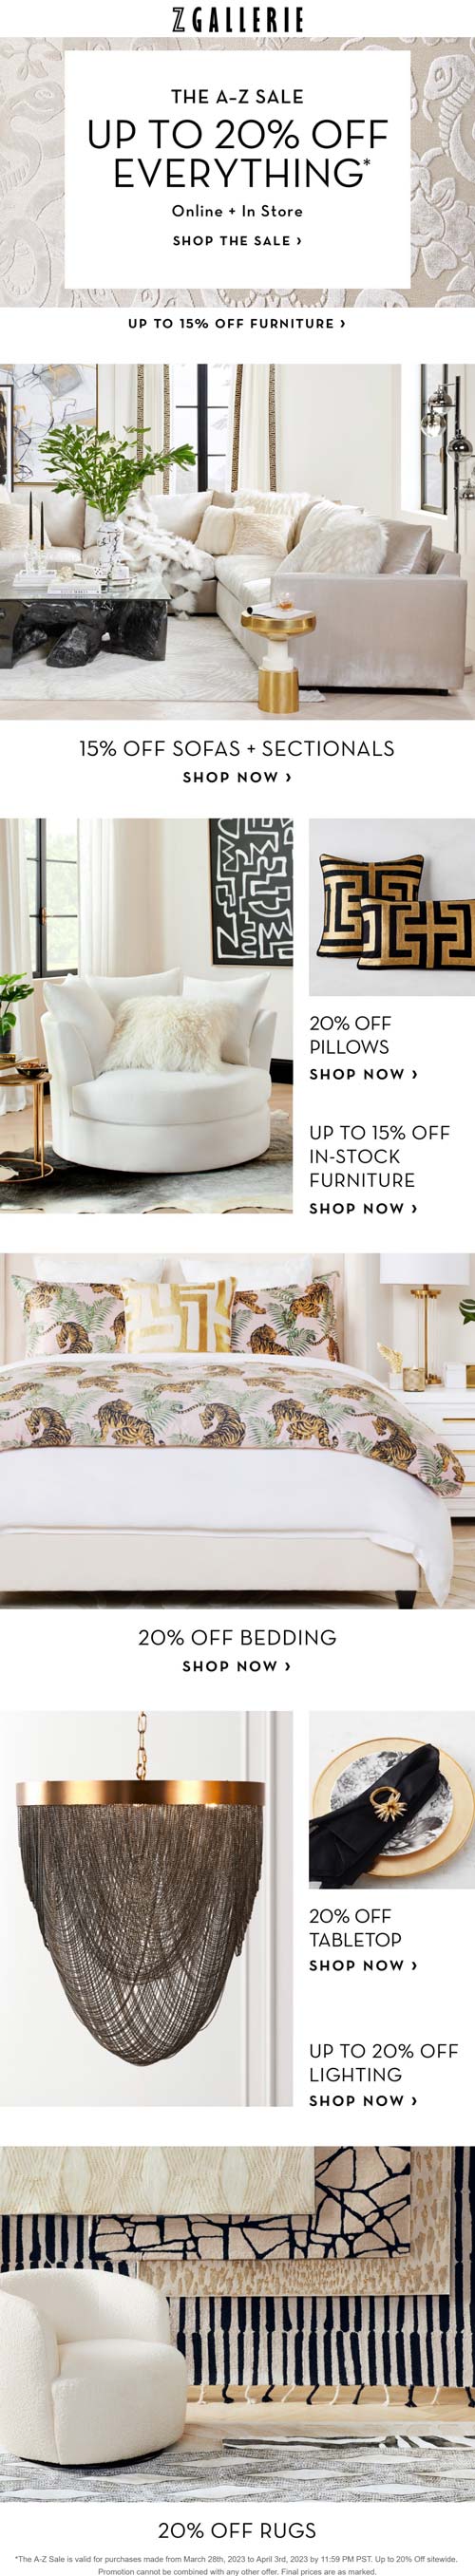 Z Gallerie stores Coupon  15-20% off at Z Gallerie, ditto online #zgallerie 